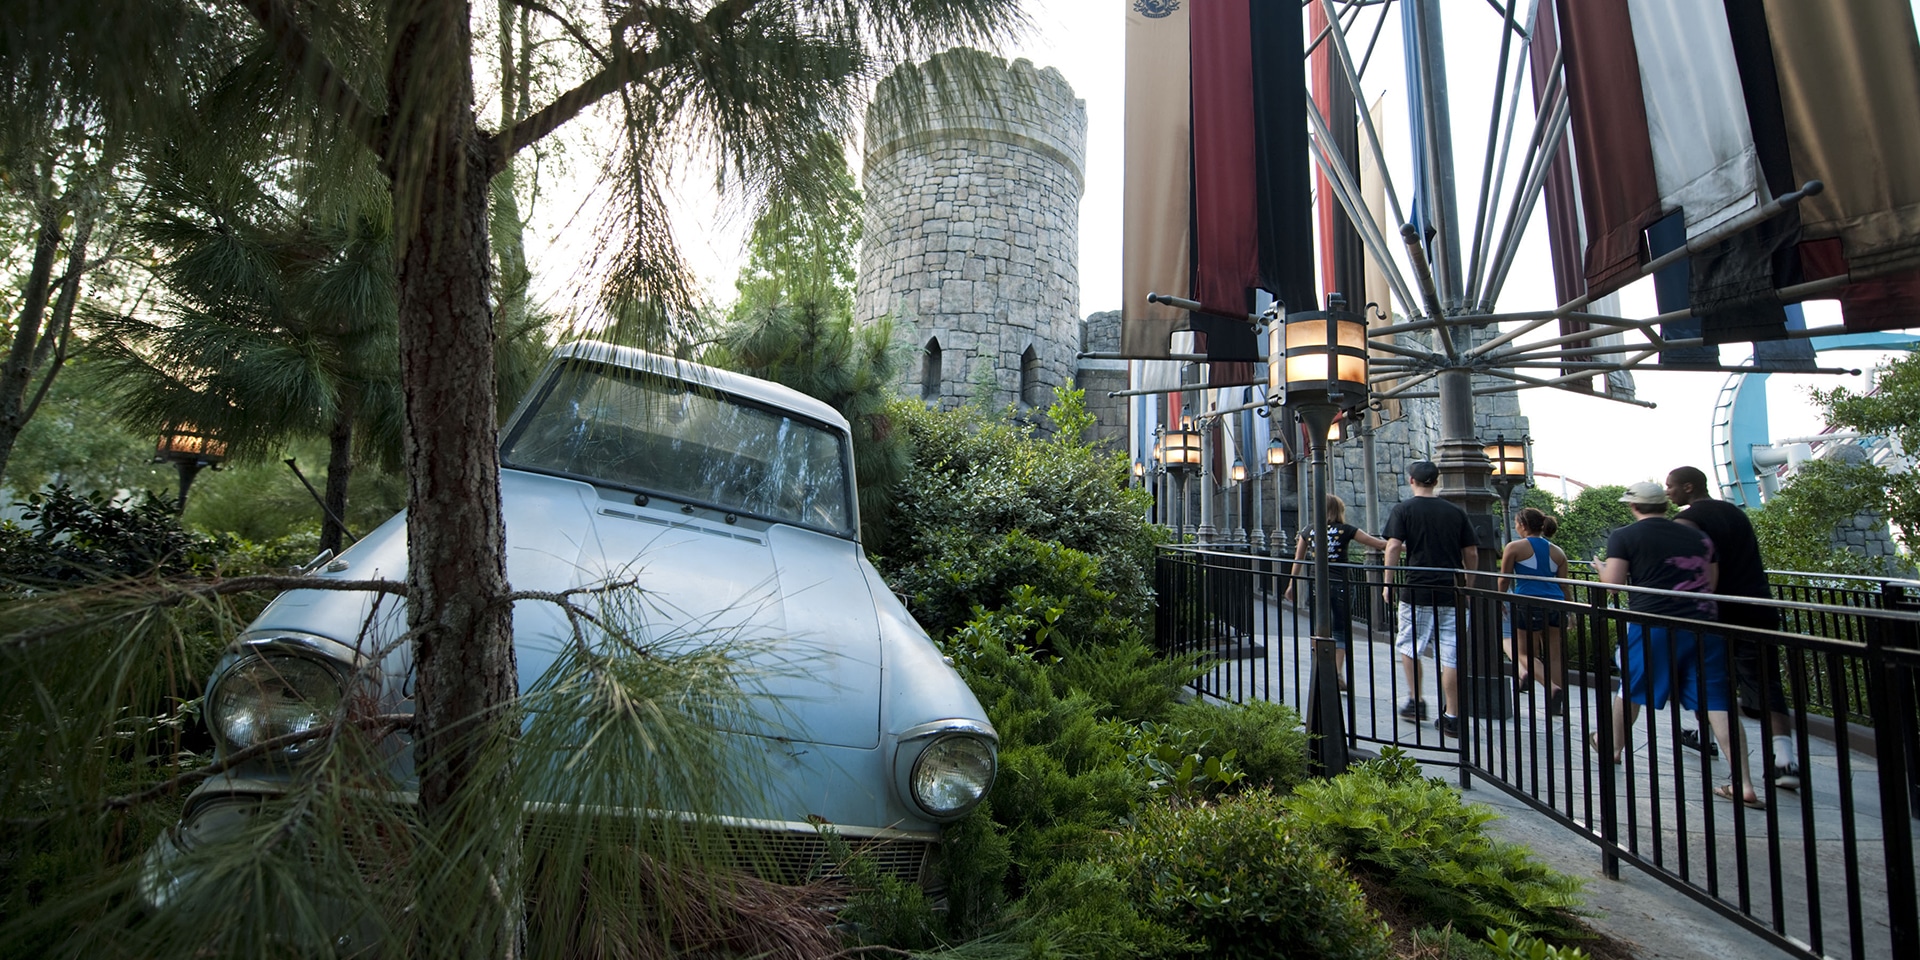 Dragon Challenge at the Wizarding World of Harry Potter.